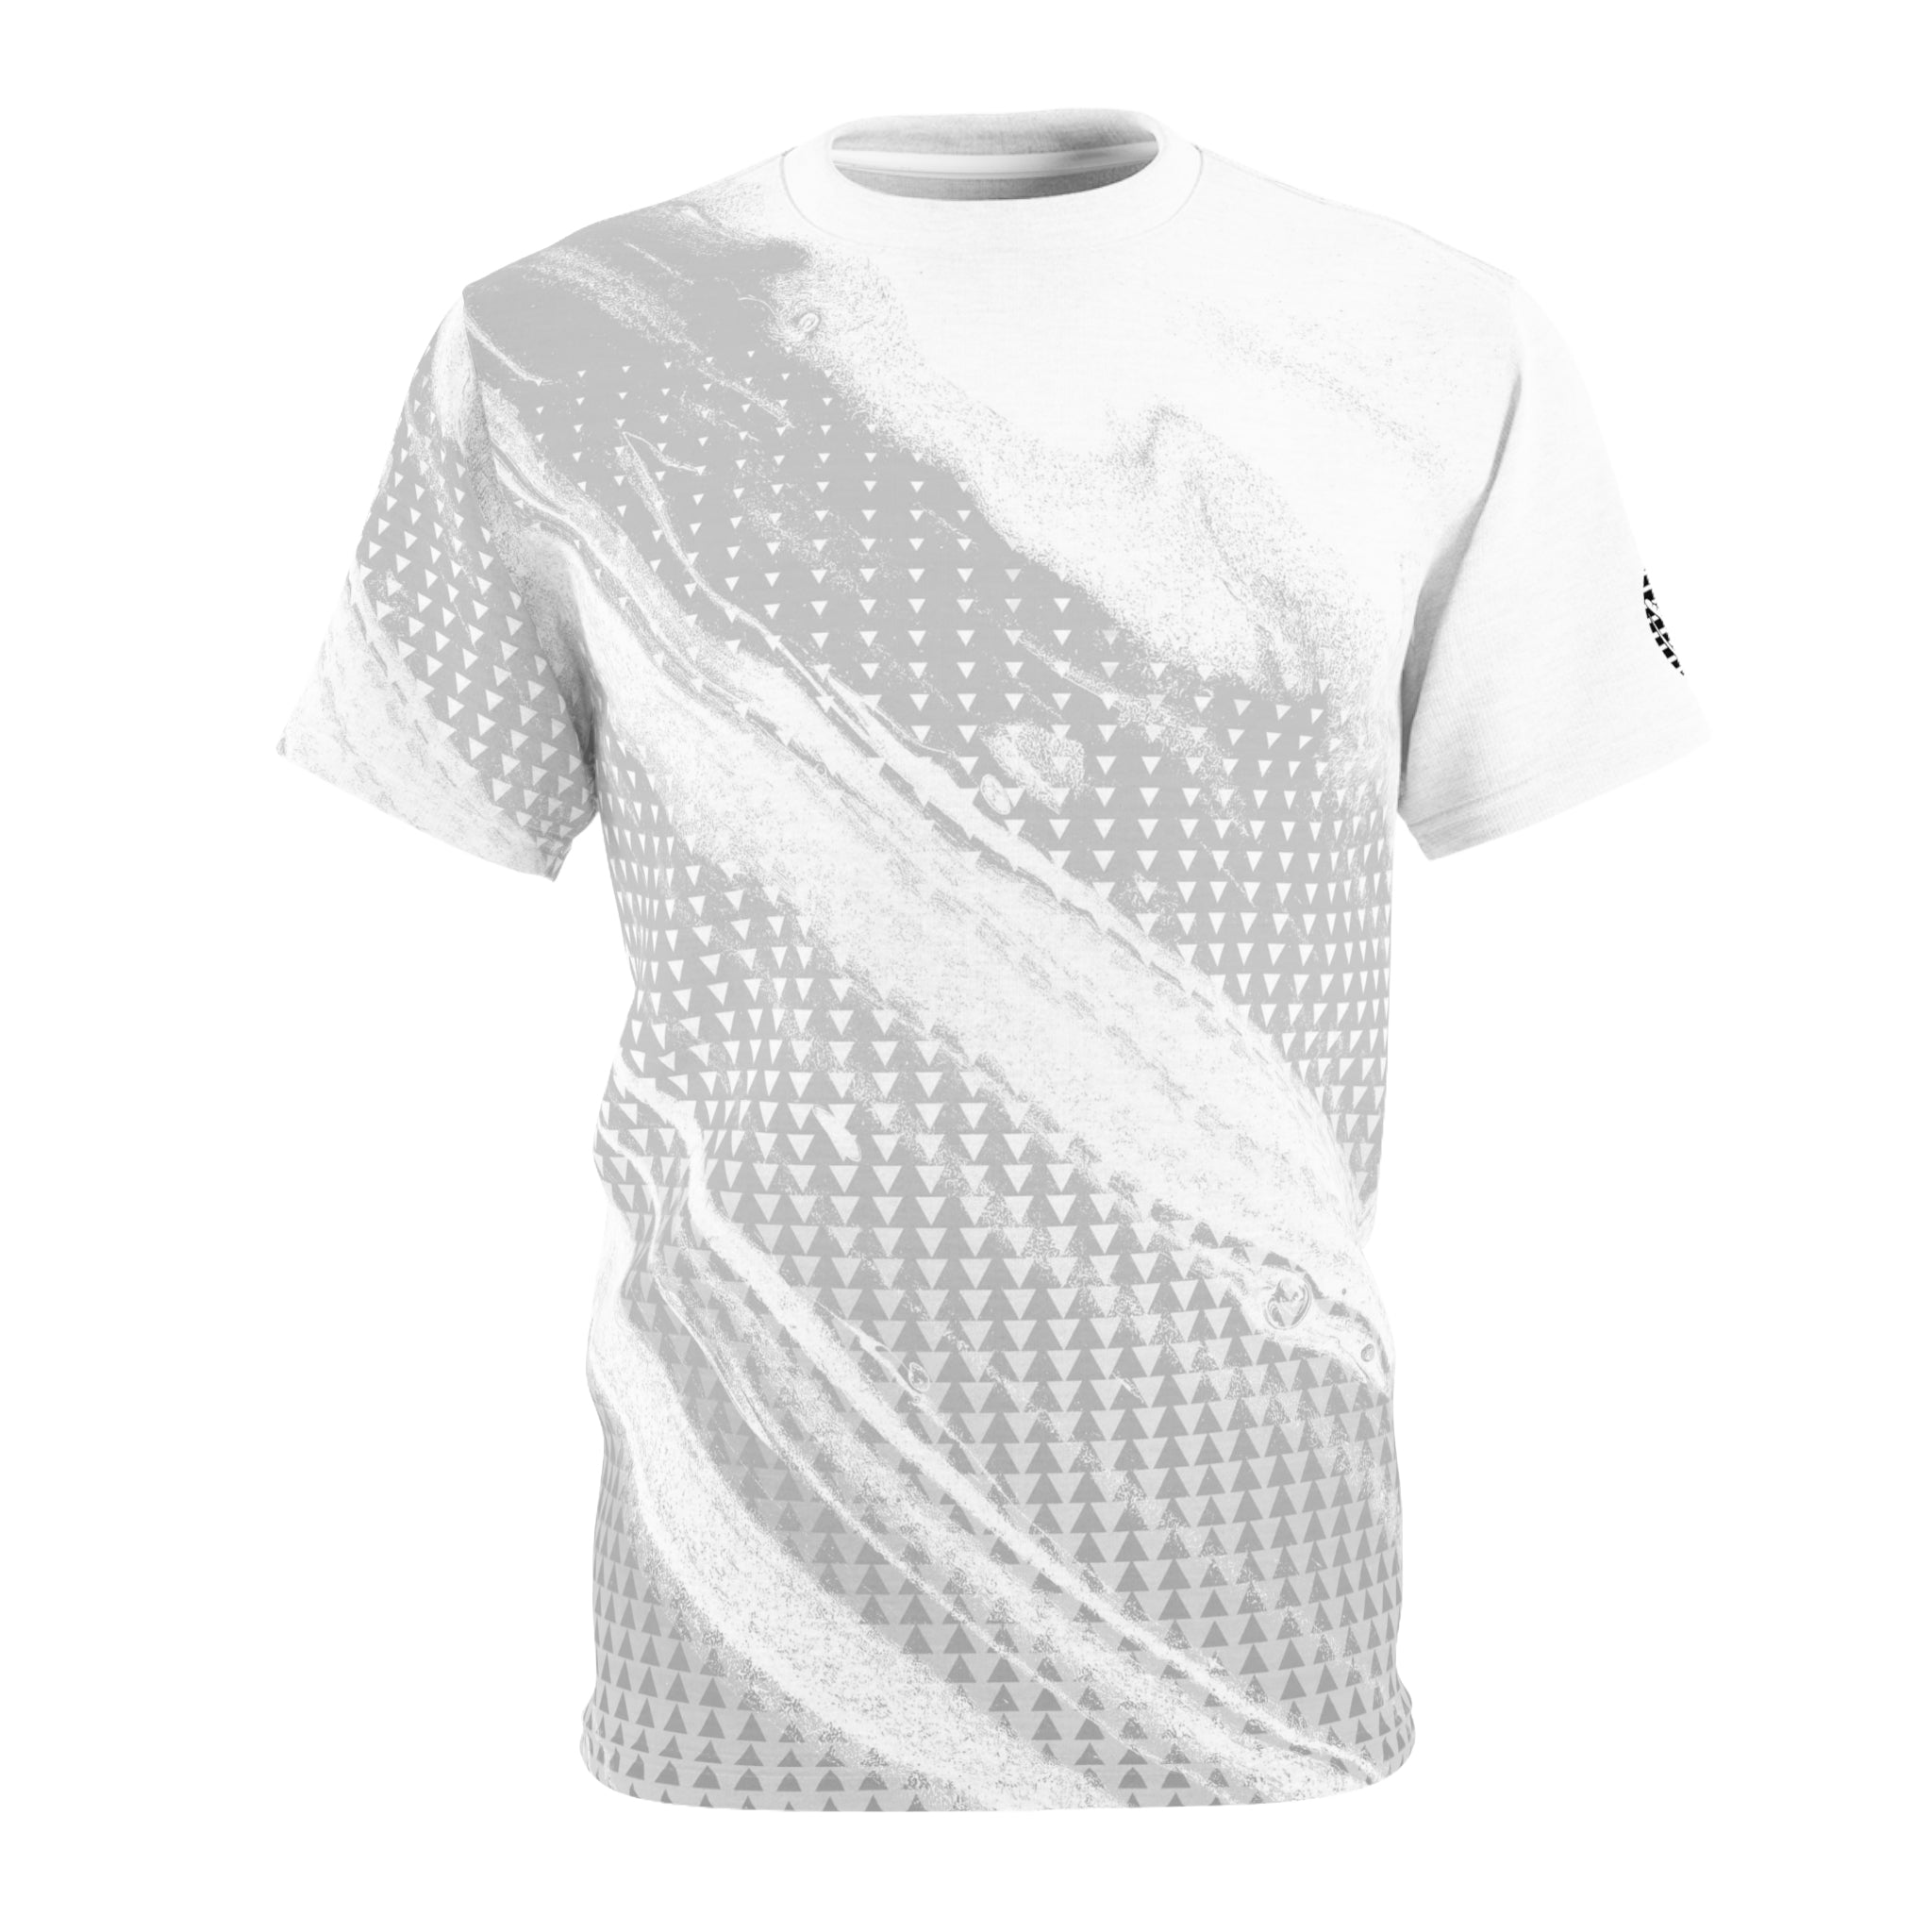 Jersey Discs White Water Sublimation Unisex Cut & Sew Tee